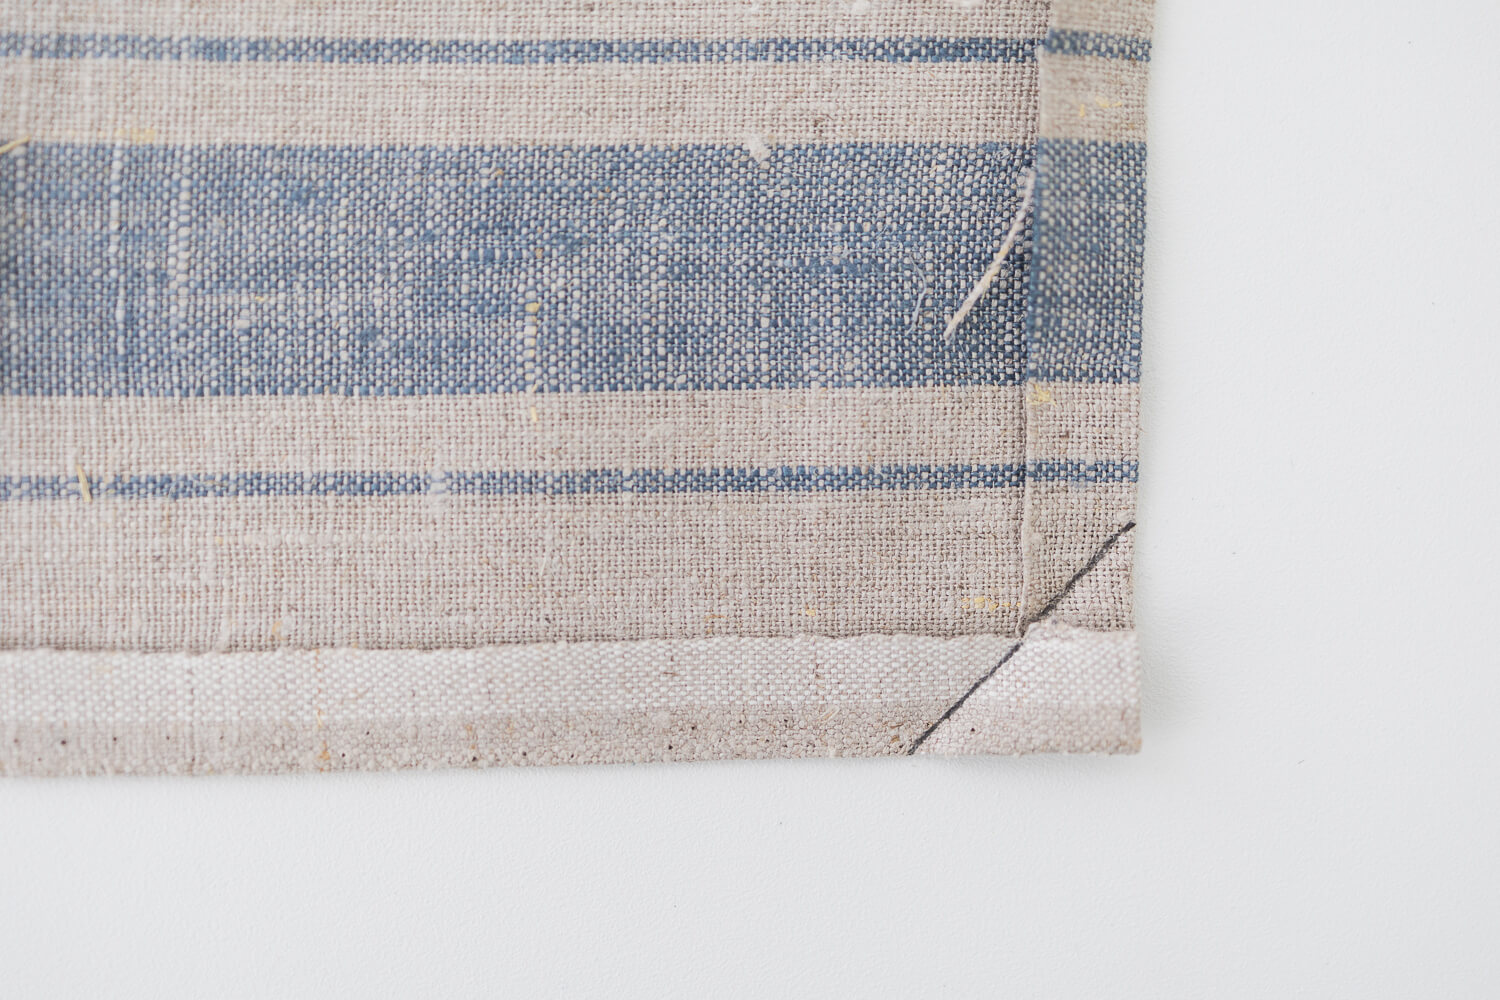 How to Make Your Own Tea Towels or Napkins Out of Linen